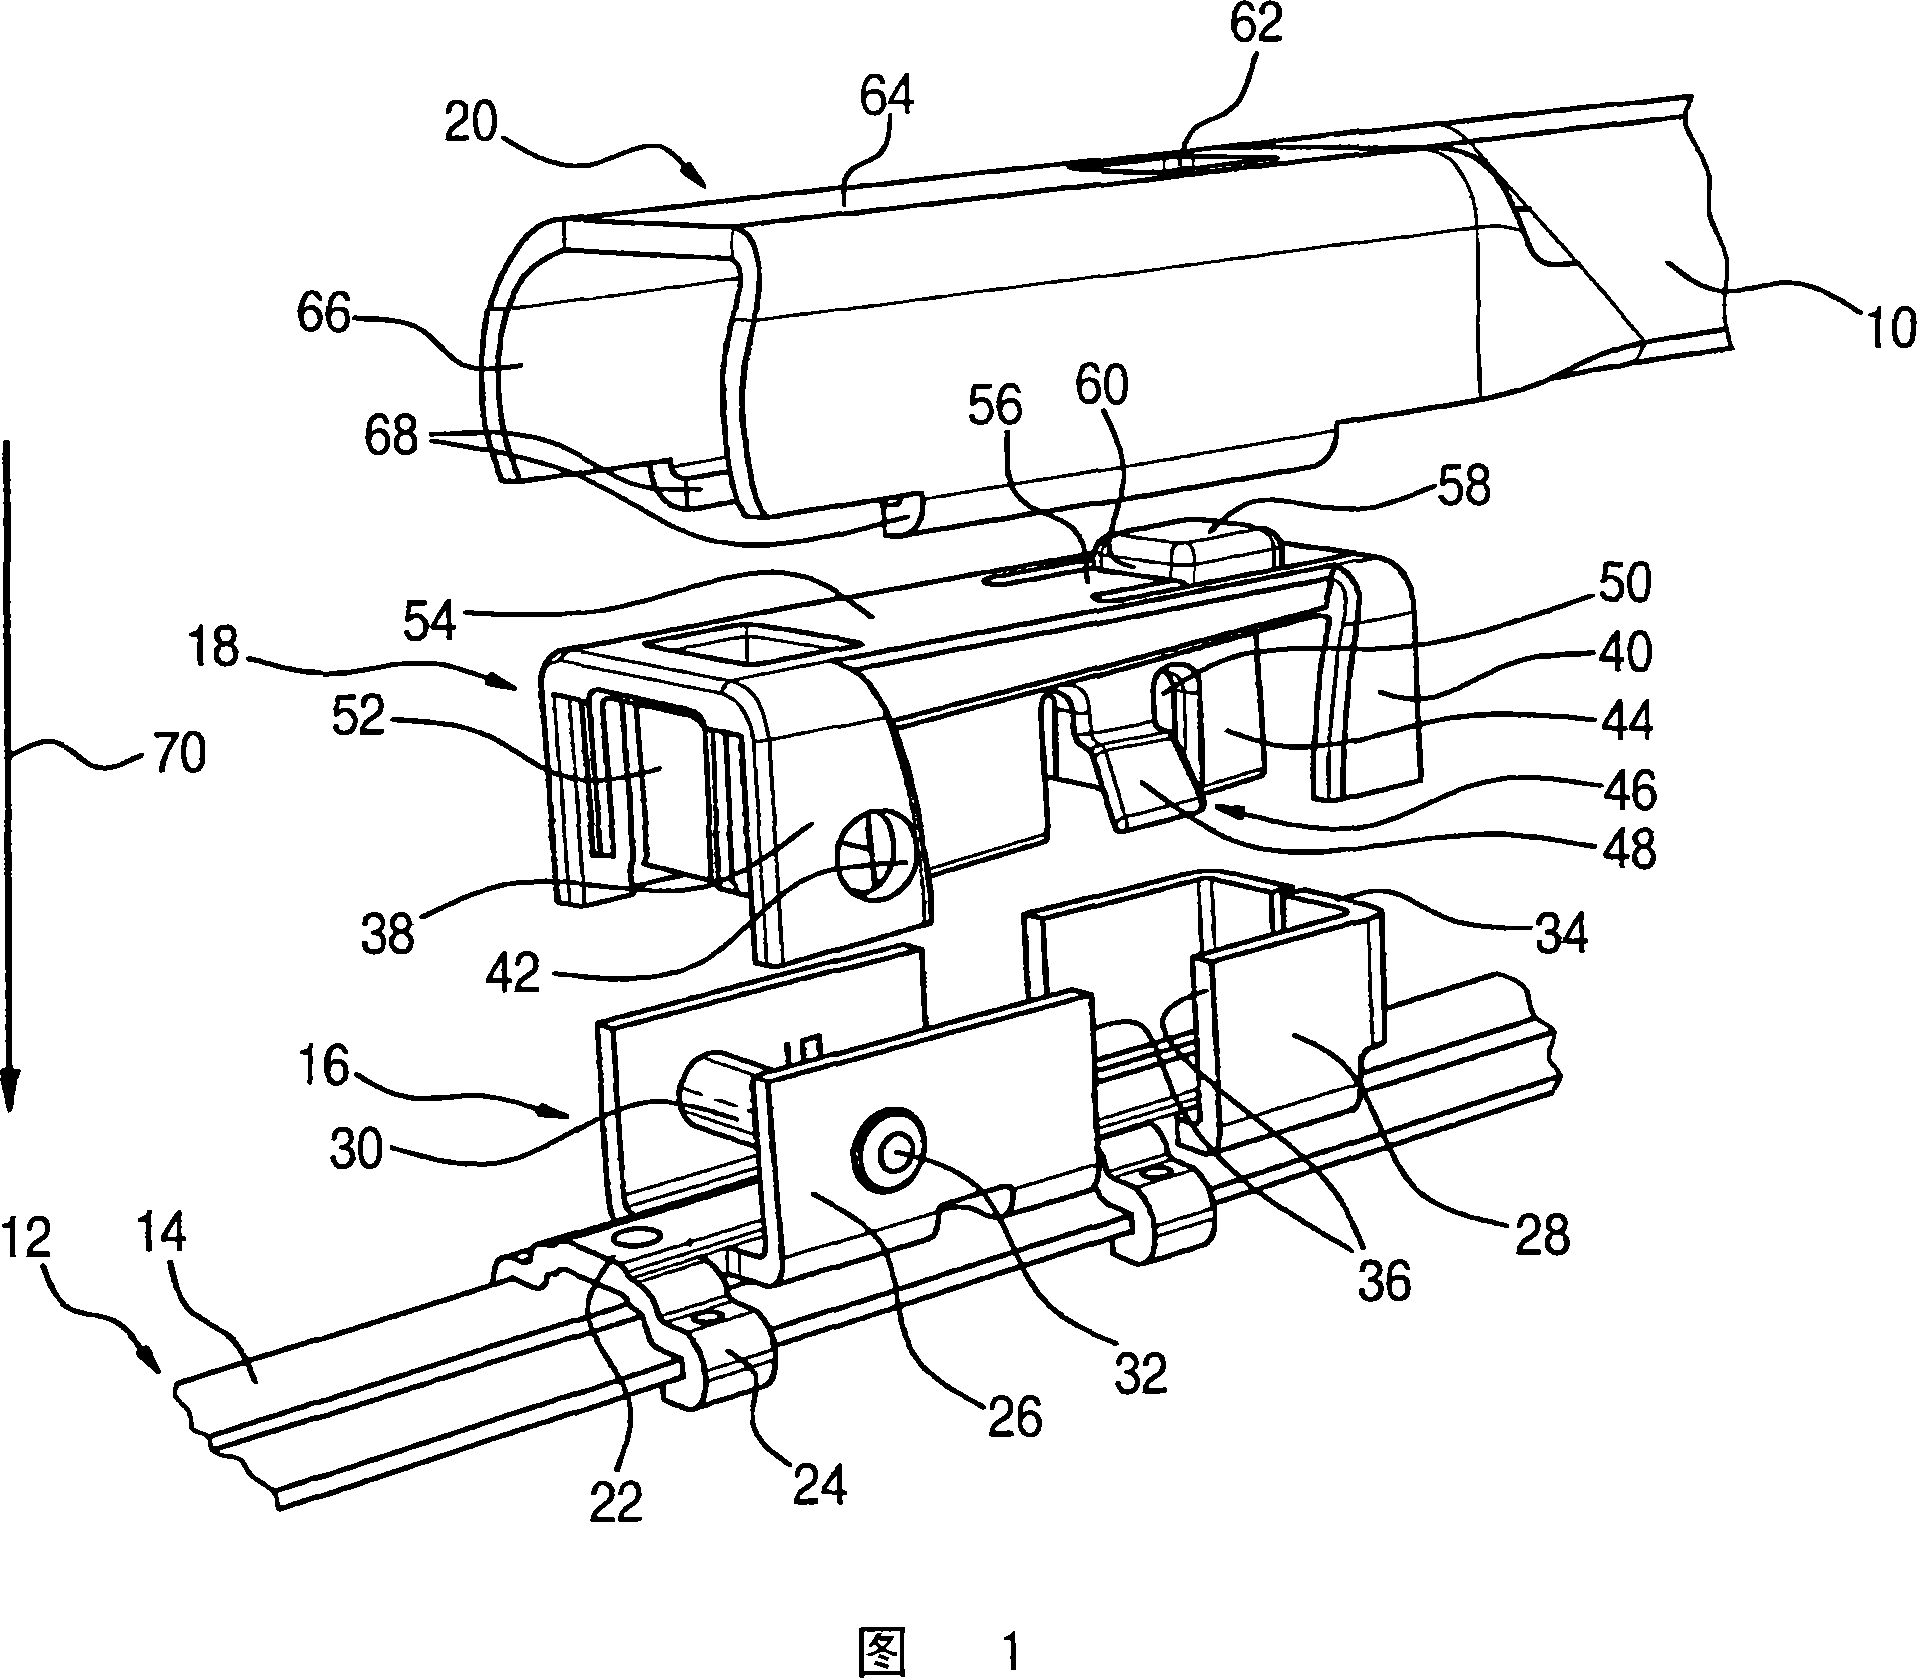 Device for the pivoting connection of a wiper blade to a wiper arm of a windscreen wiper